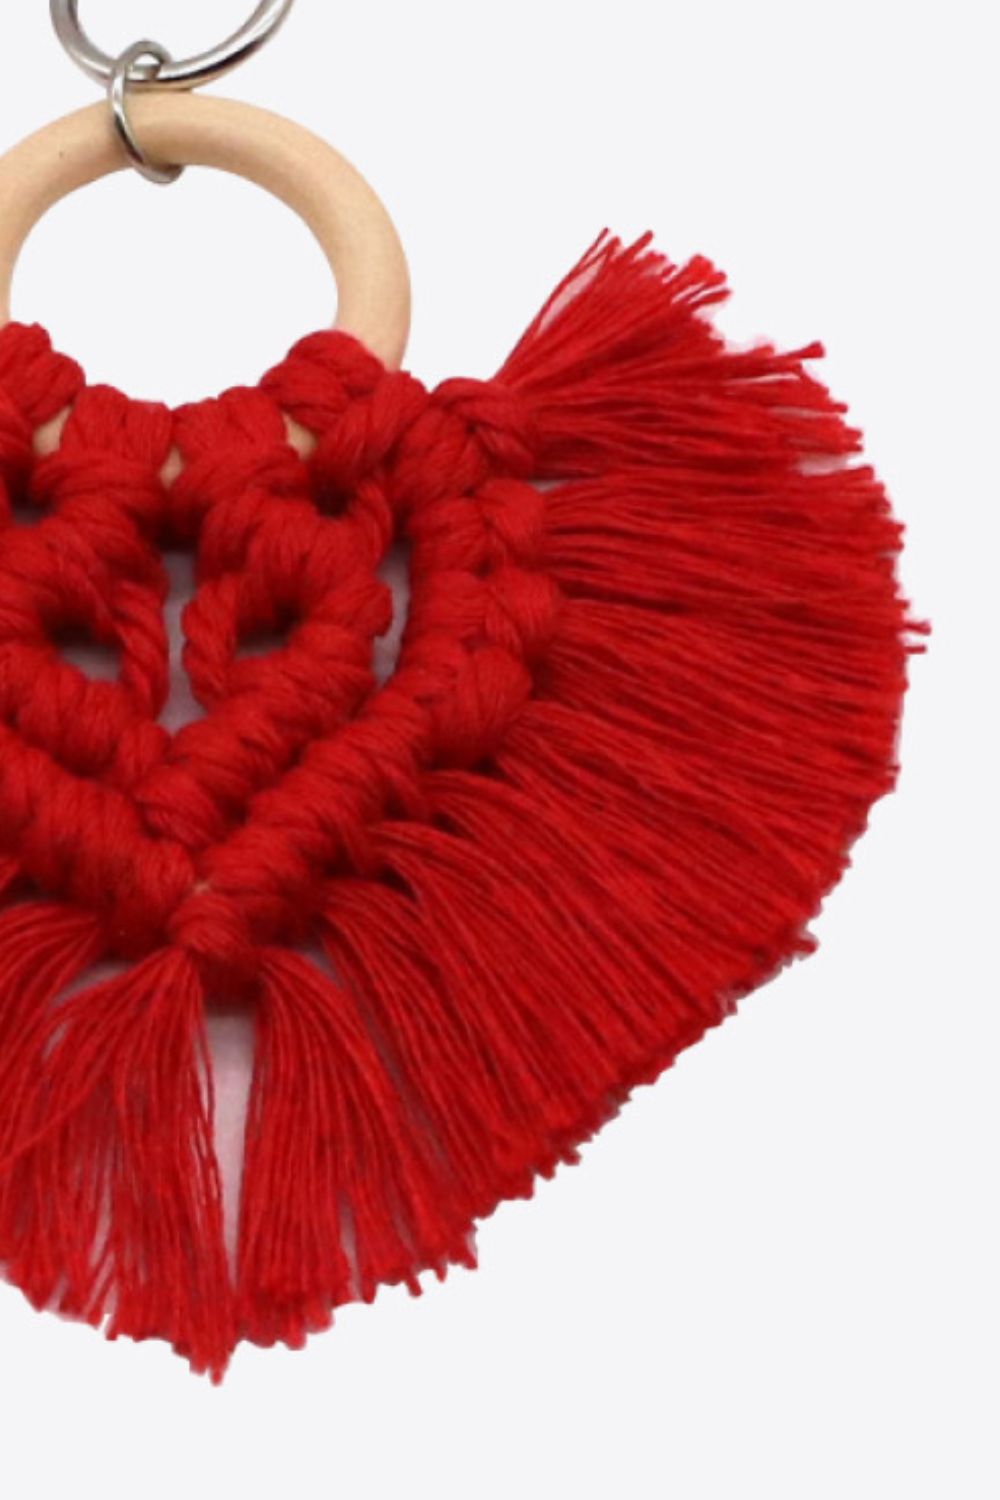 Trendsi Cupid Beauty Supplies Keychains Assorted 4-Pack Heart-Shaped Macrame Fringe Keychain